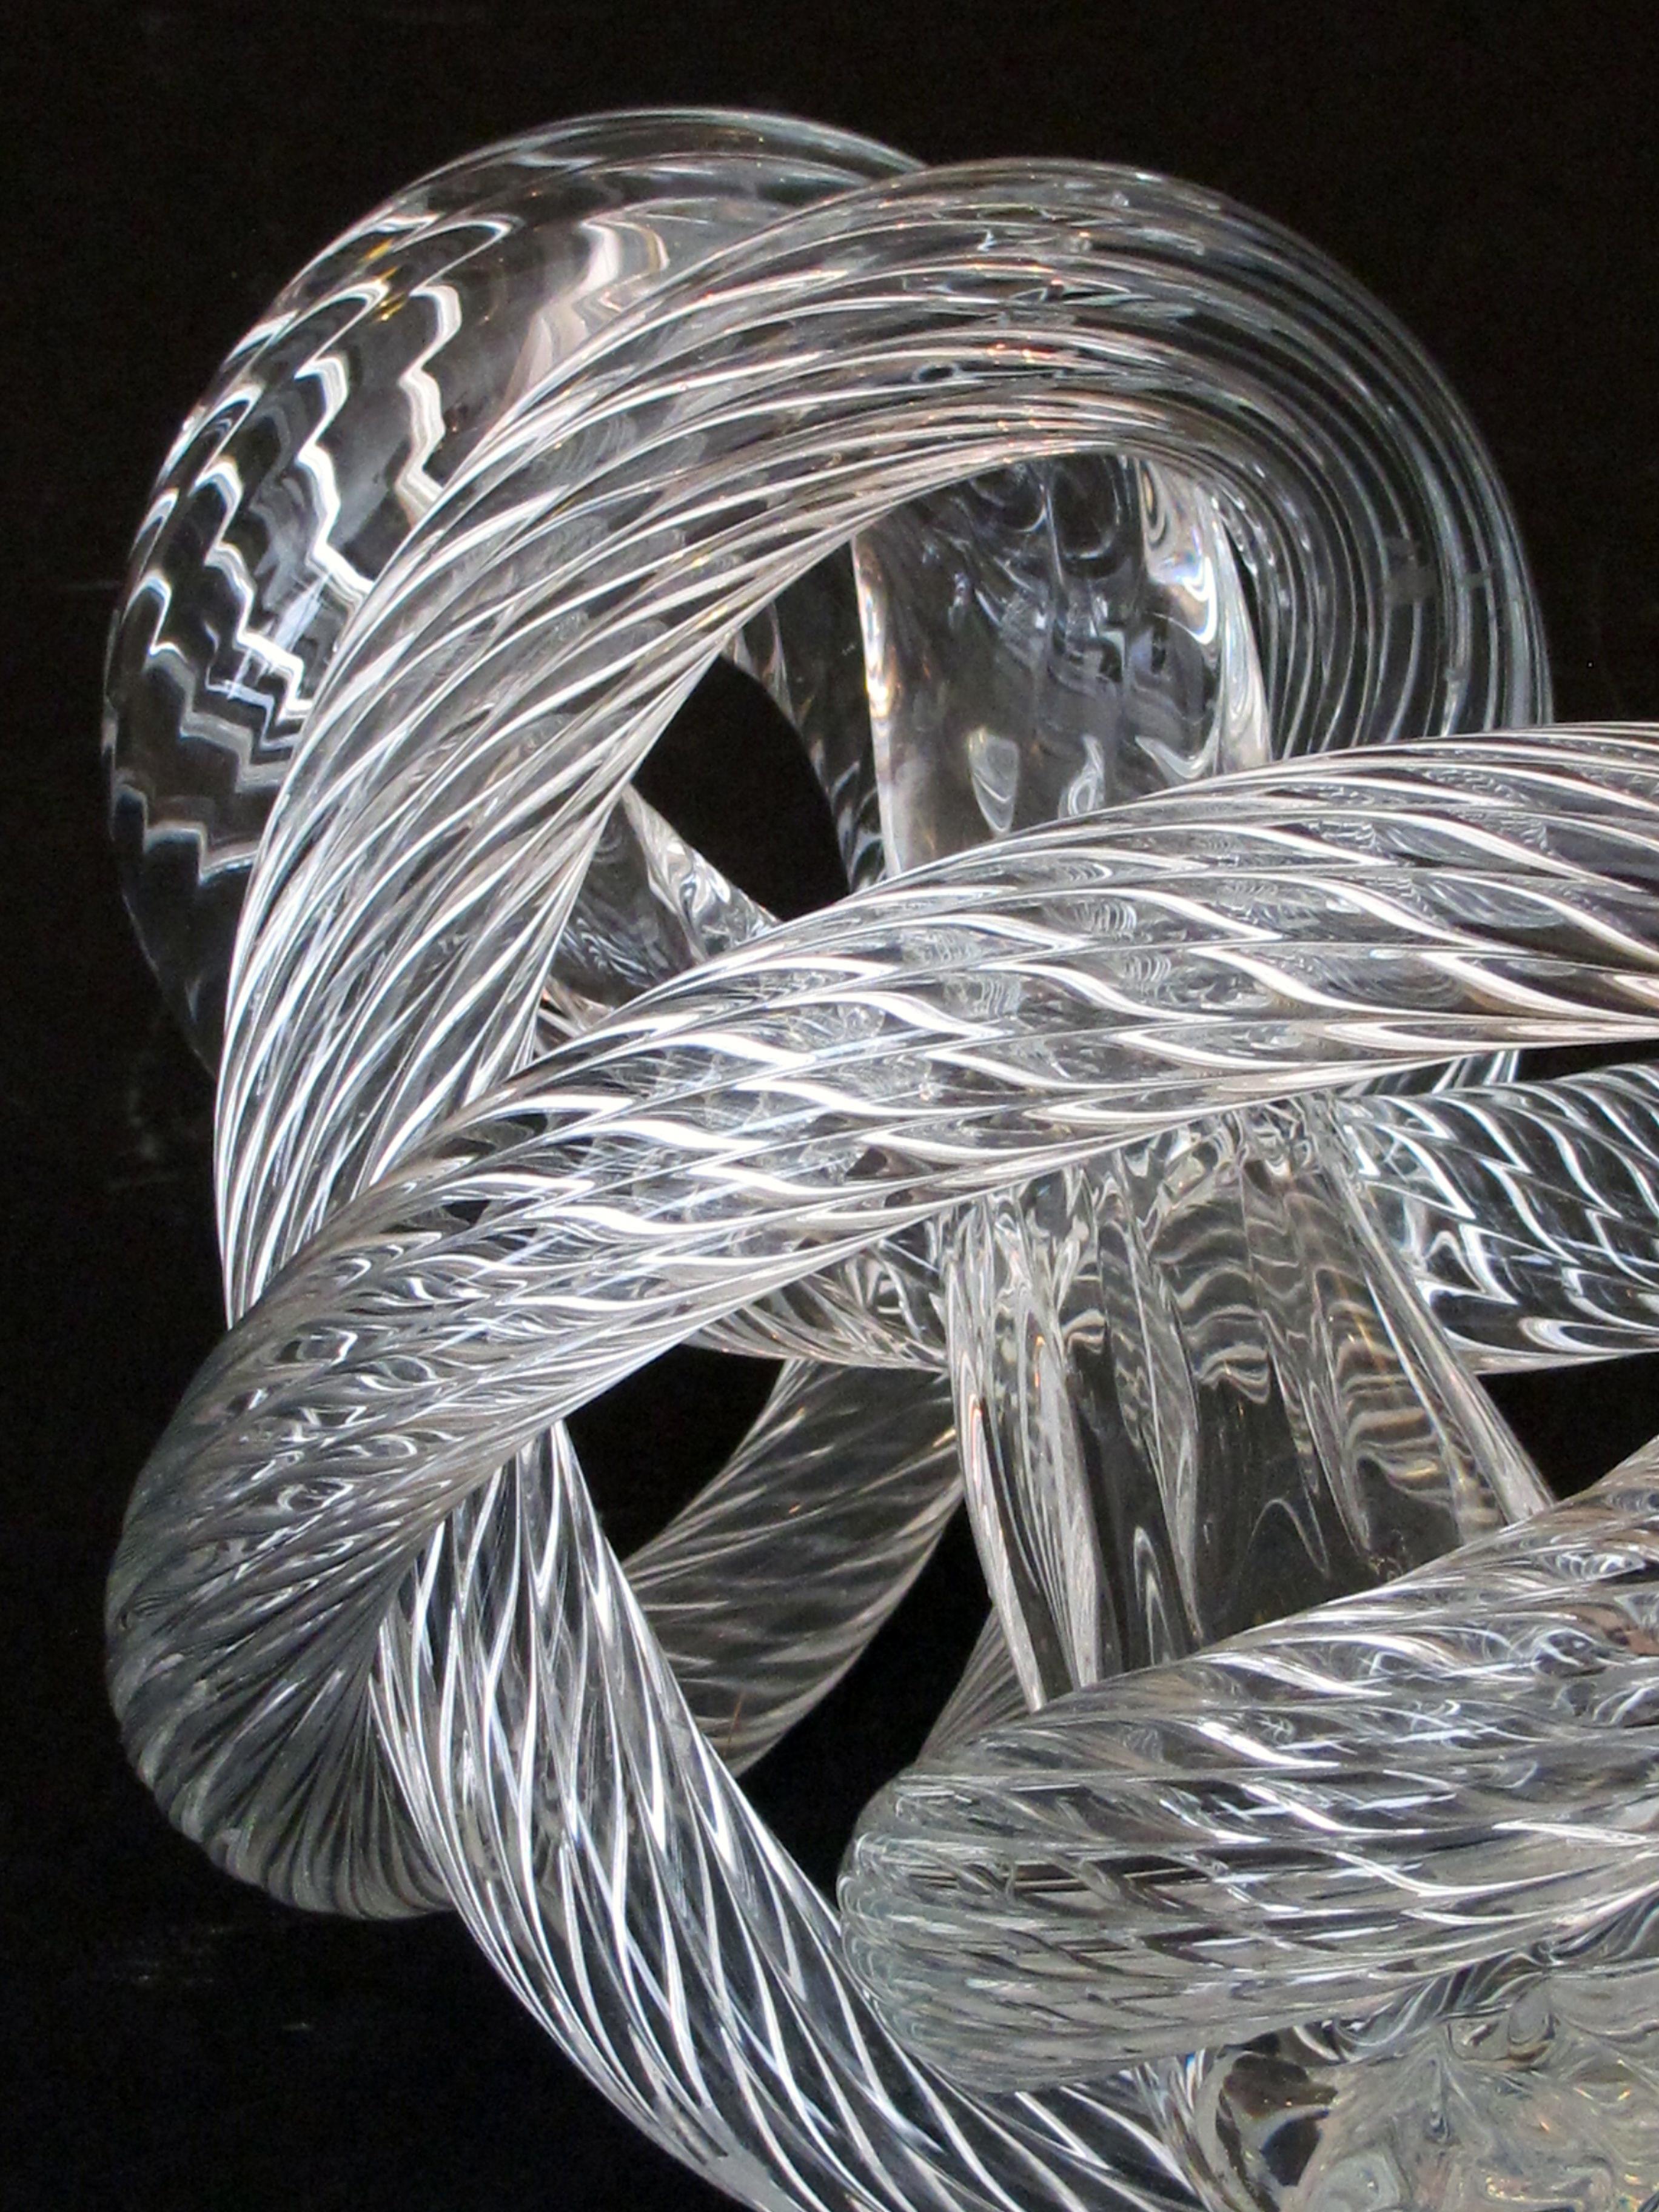 Modern Well-Crafted and Heavy Glass Rope Knot by Fusion Z Glassworks; Etched Signature For Sale